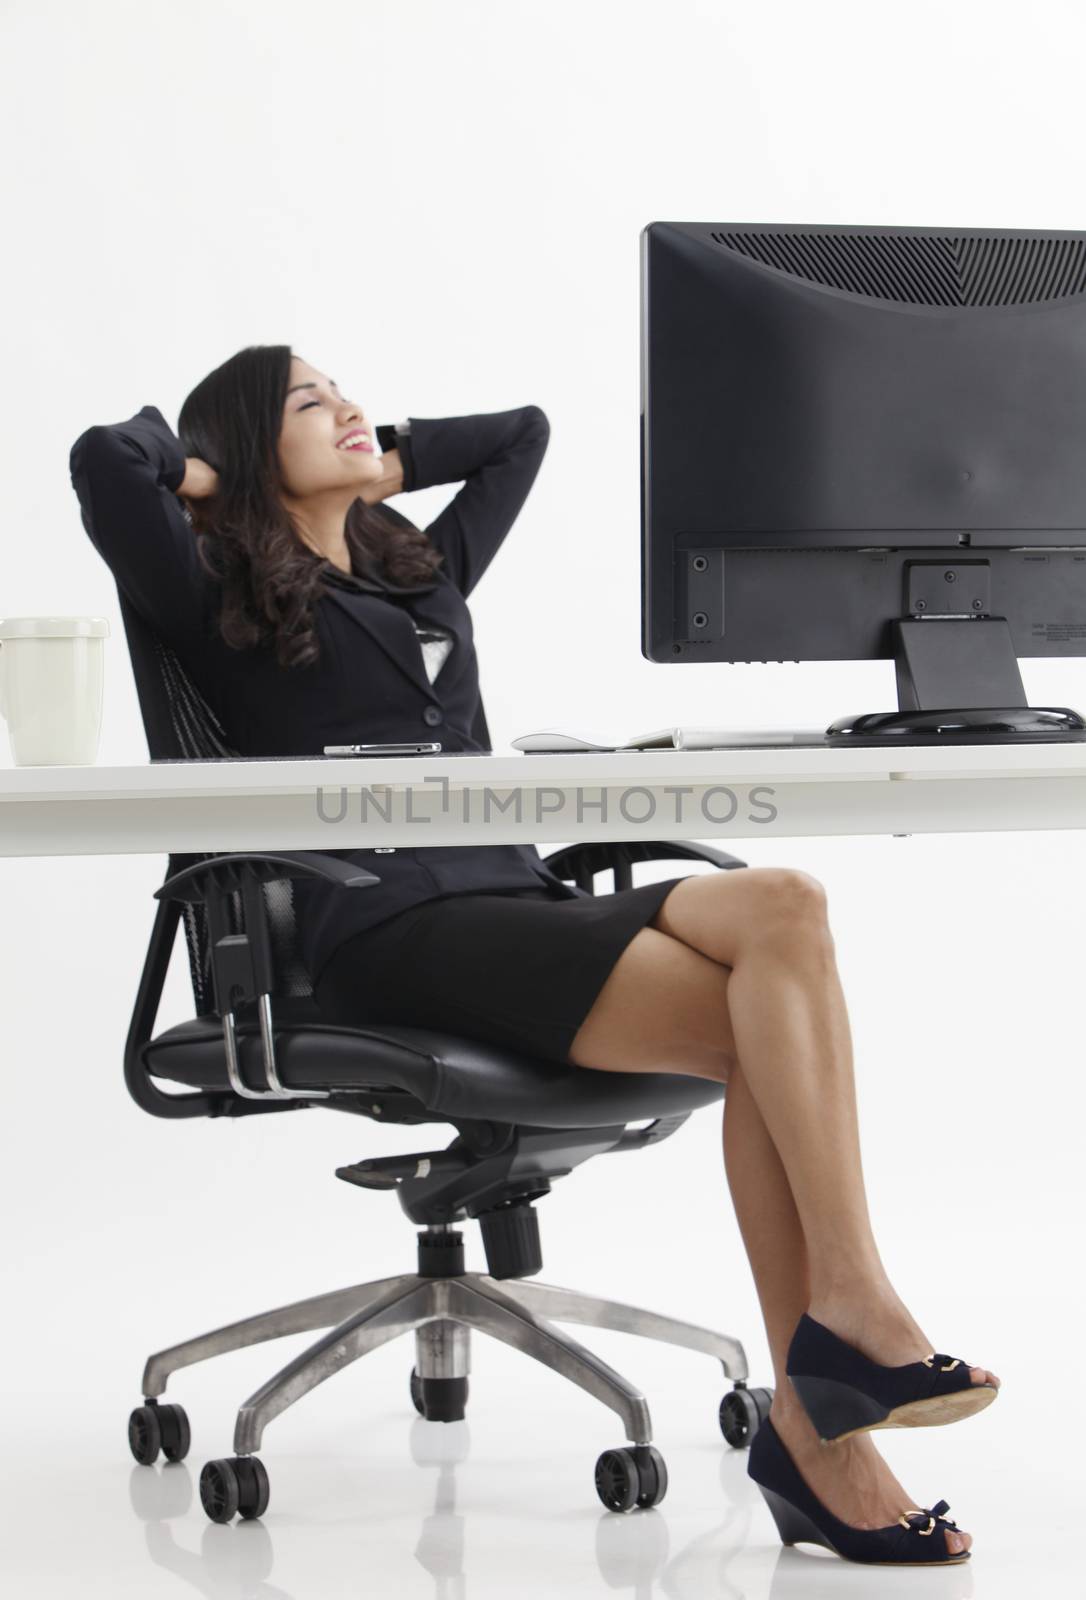 businesswoman relaxing as background focus on the foreground monitor